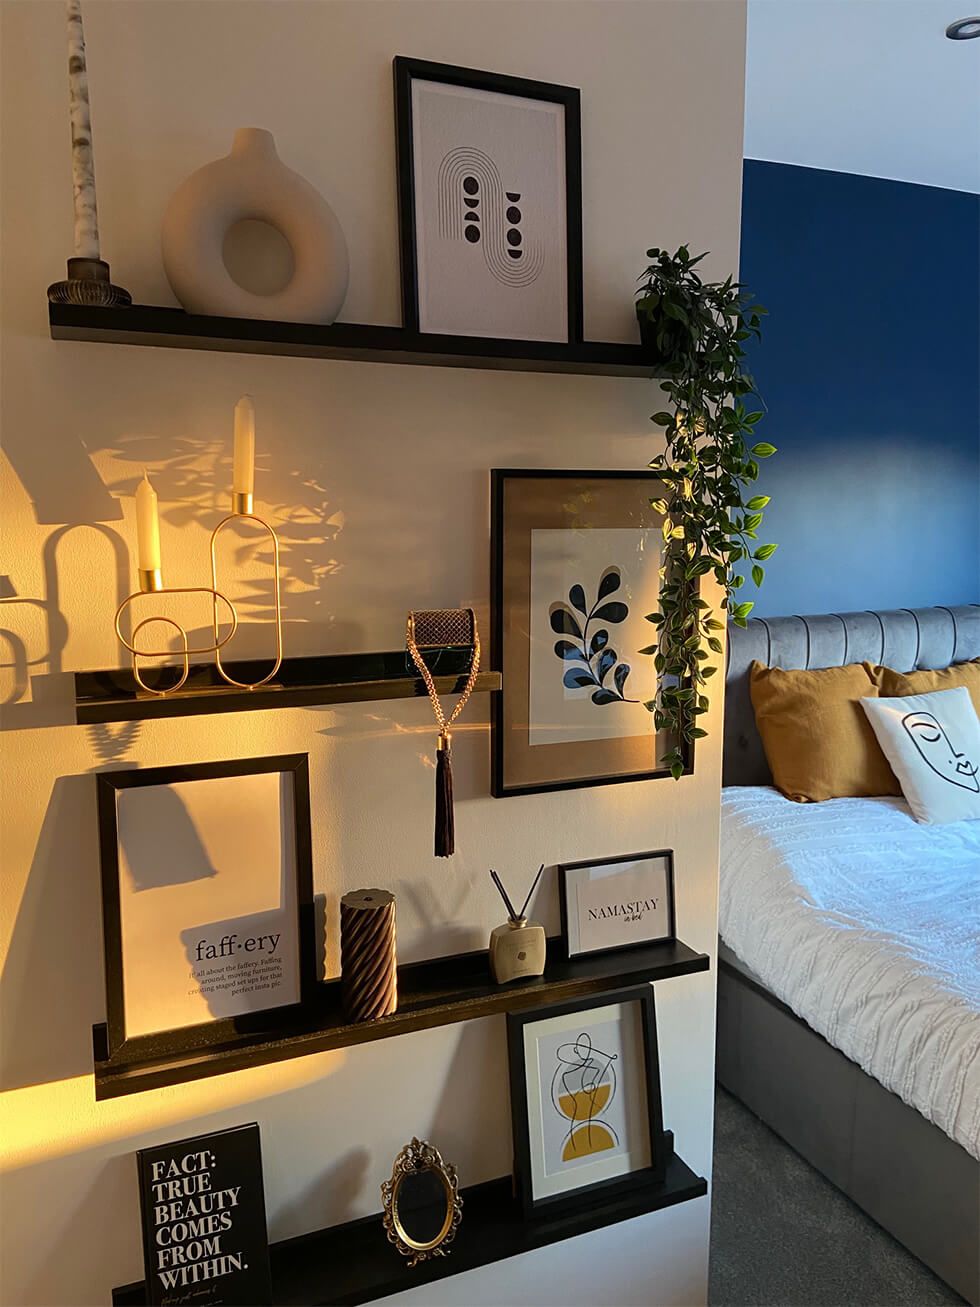 A bedroom with tastefully decorated floating shelves and a navy accent wall